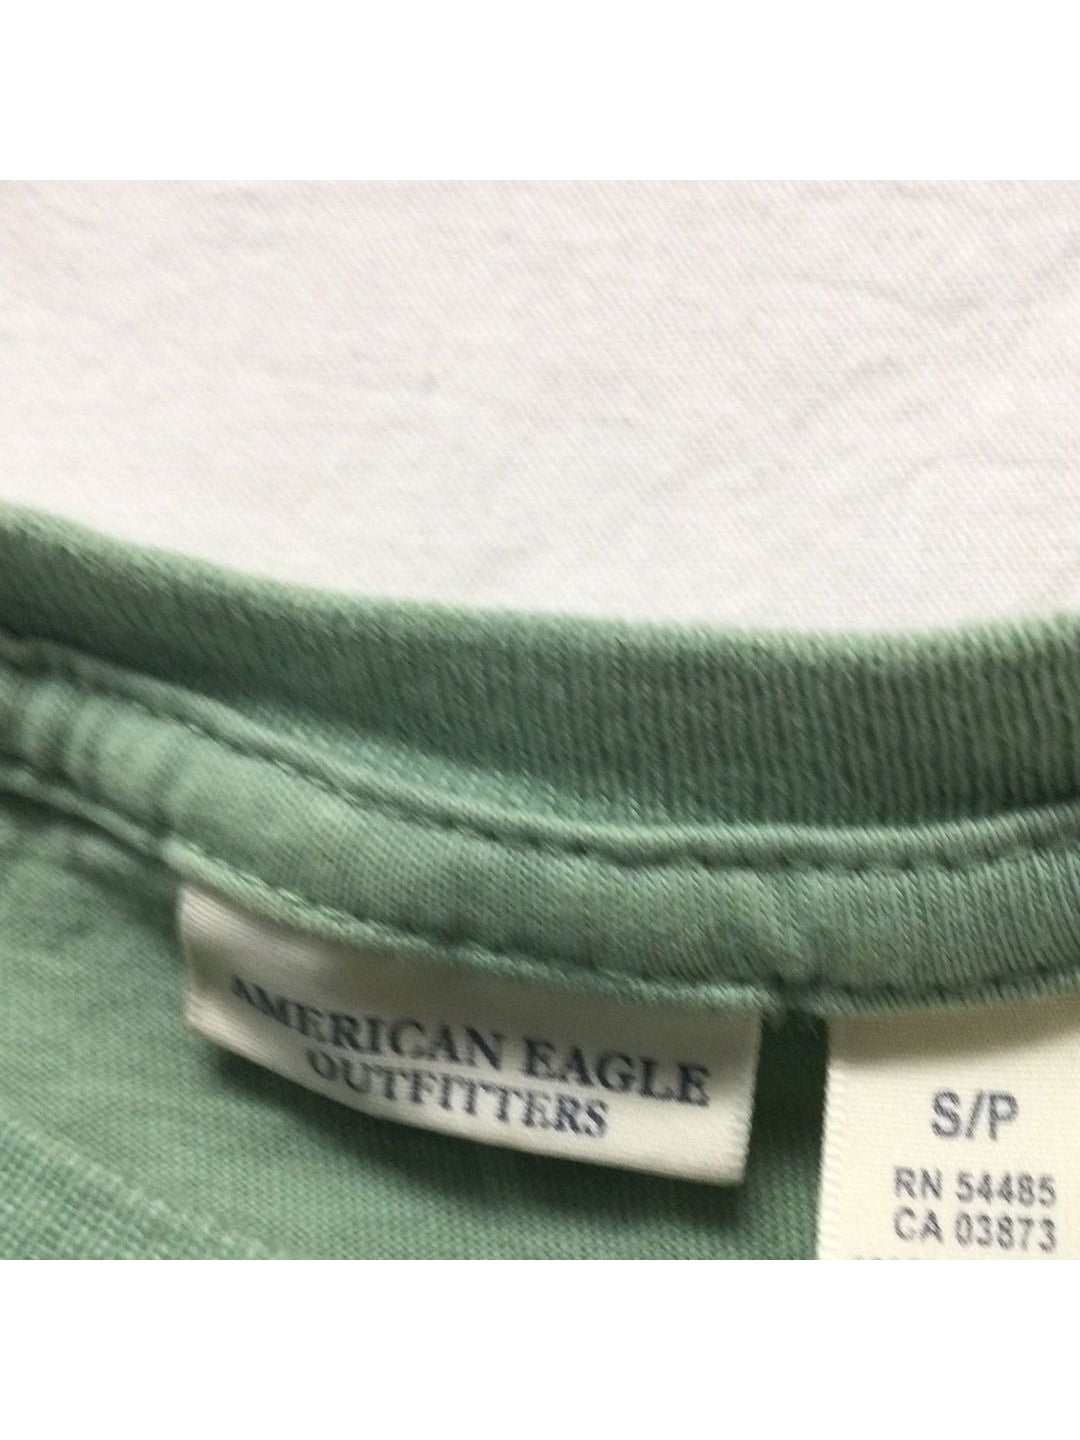 American Eagle Outfitters T-Shirt - The Kennedy Collective Thrift - 